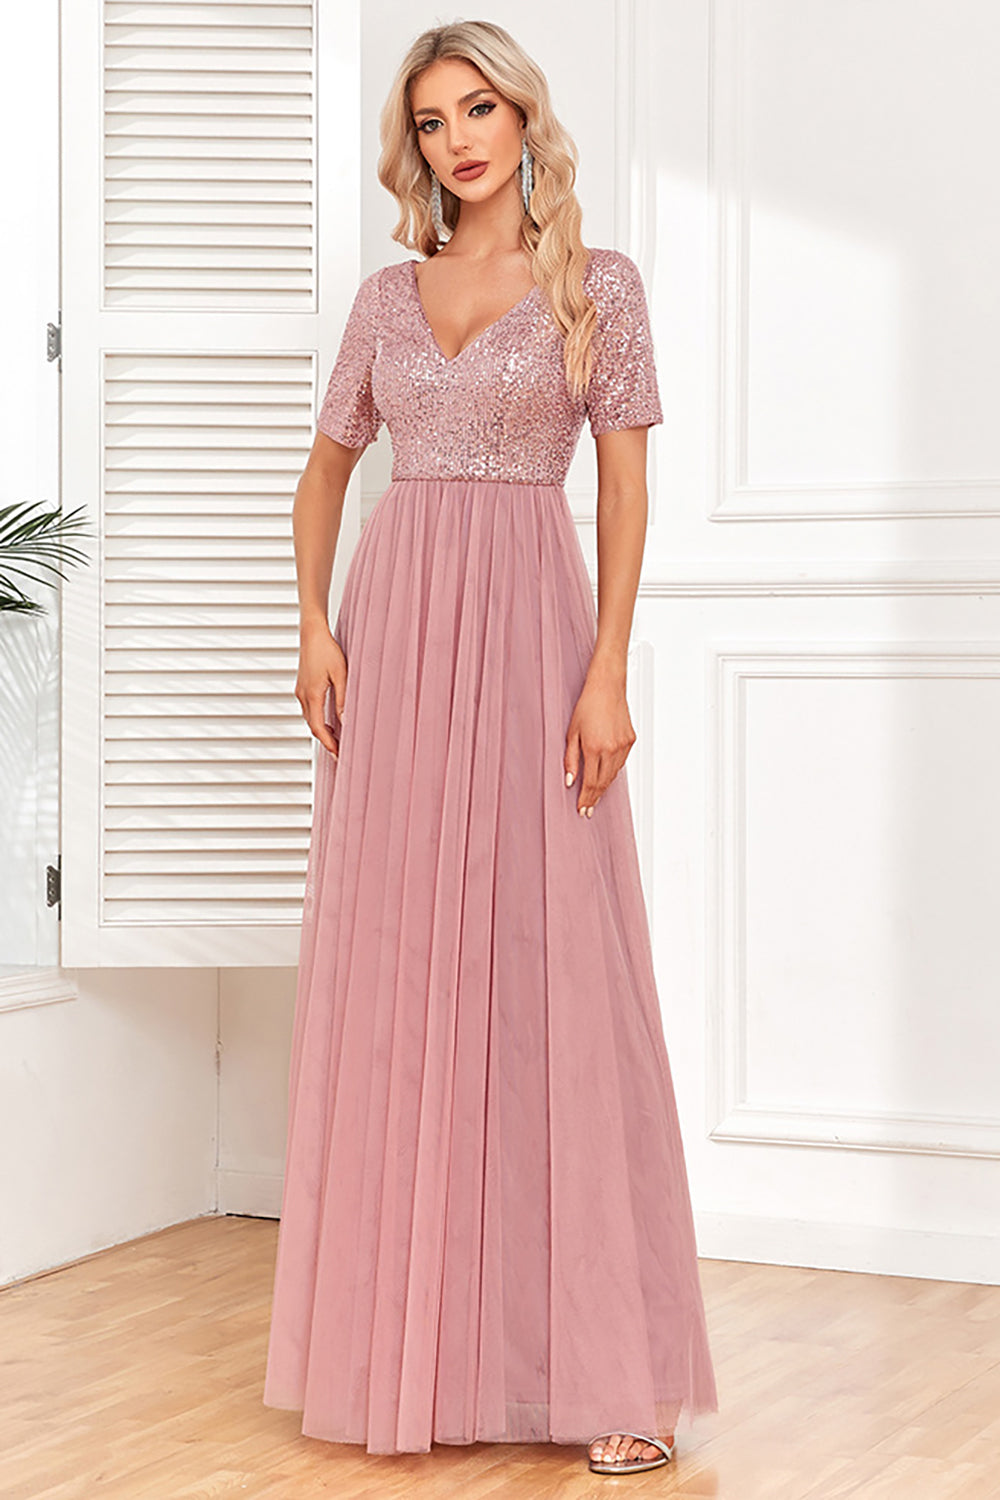 Dusty Rose A-Line V Neck Tulle Prom Dress with Short Sleeves